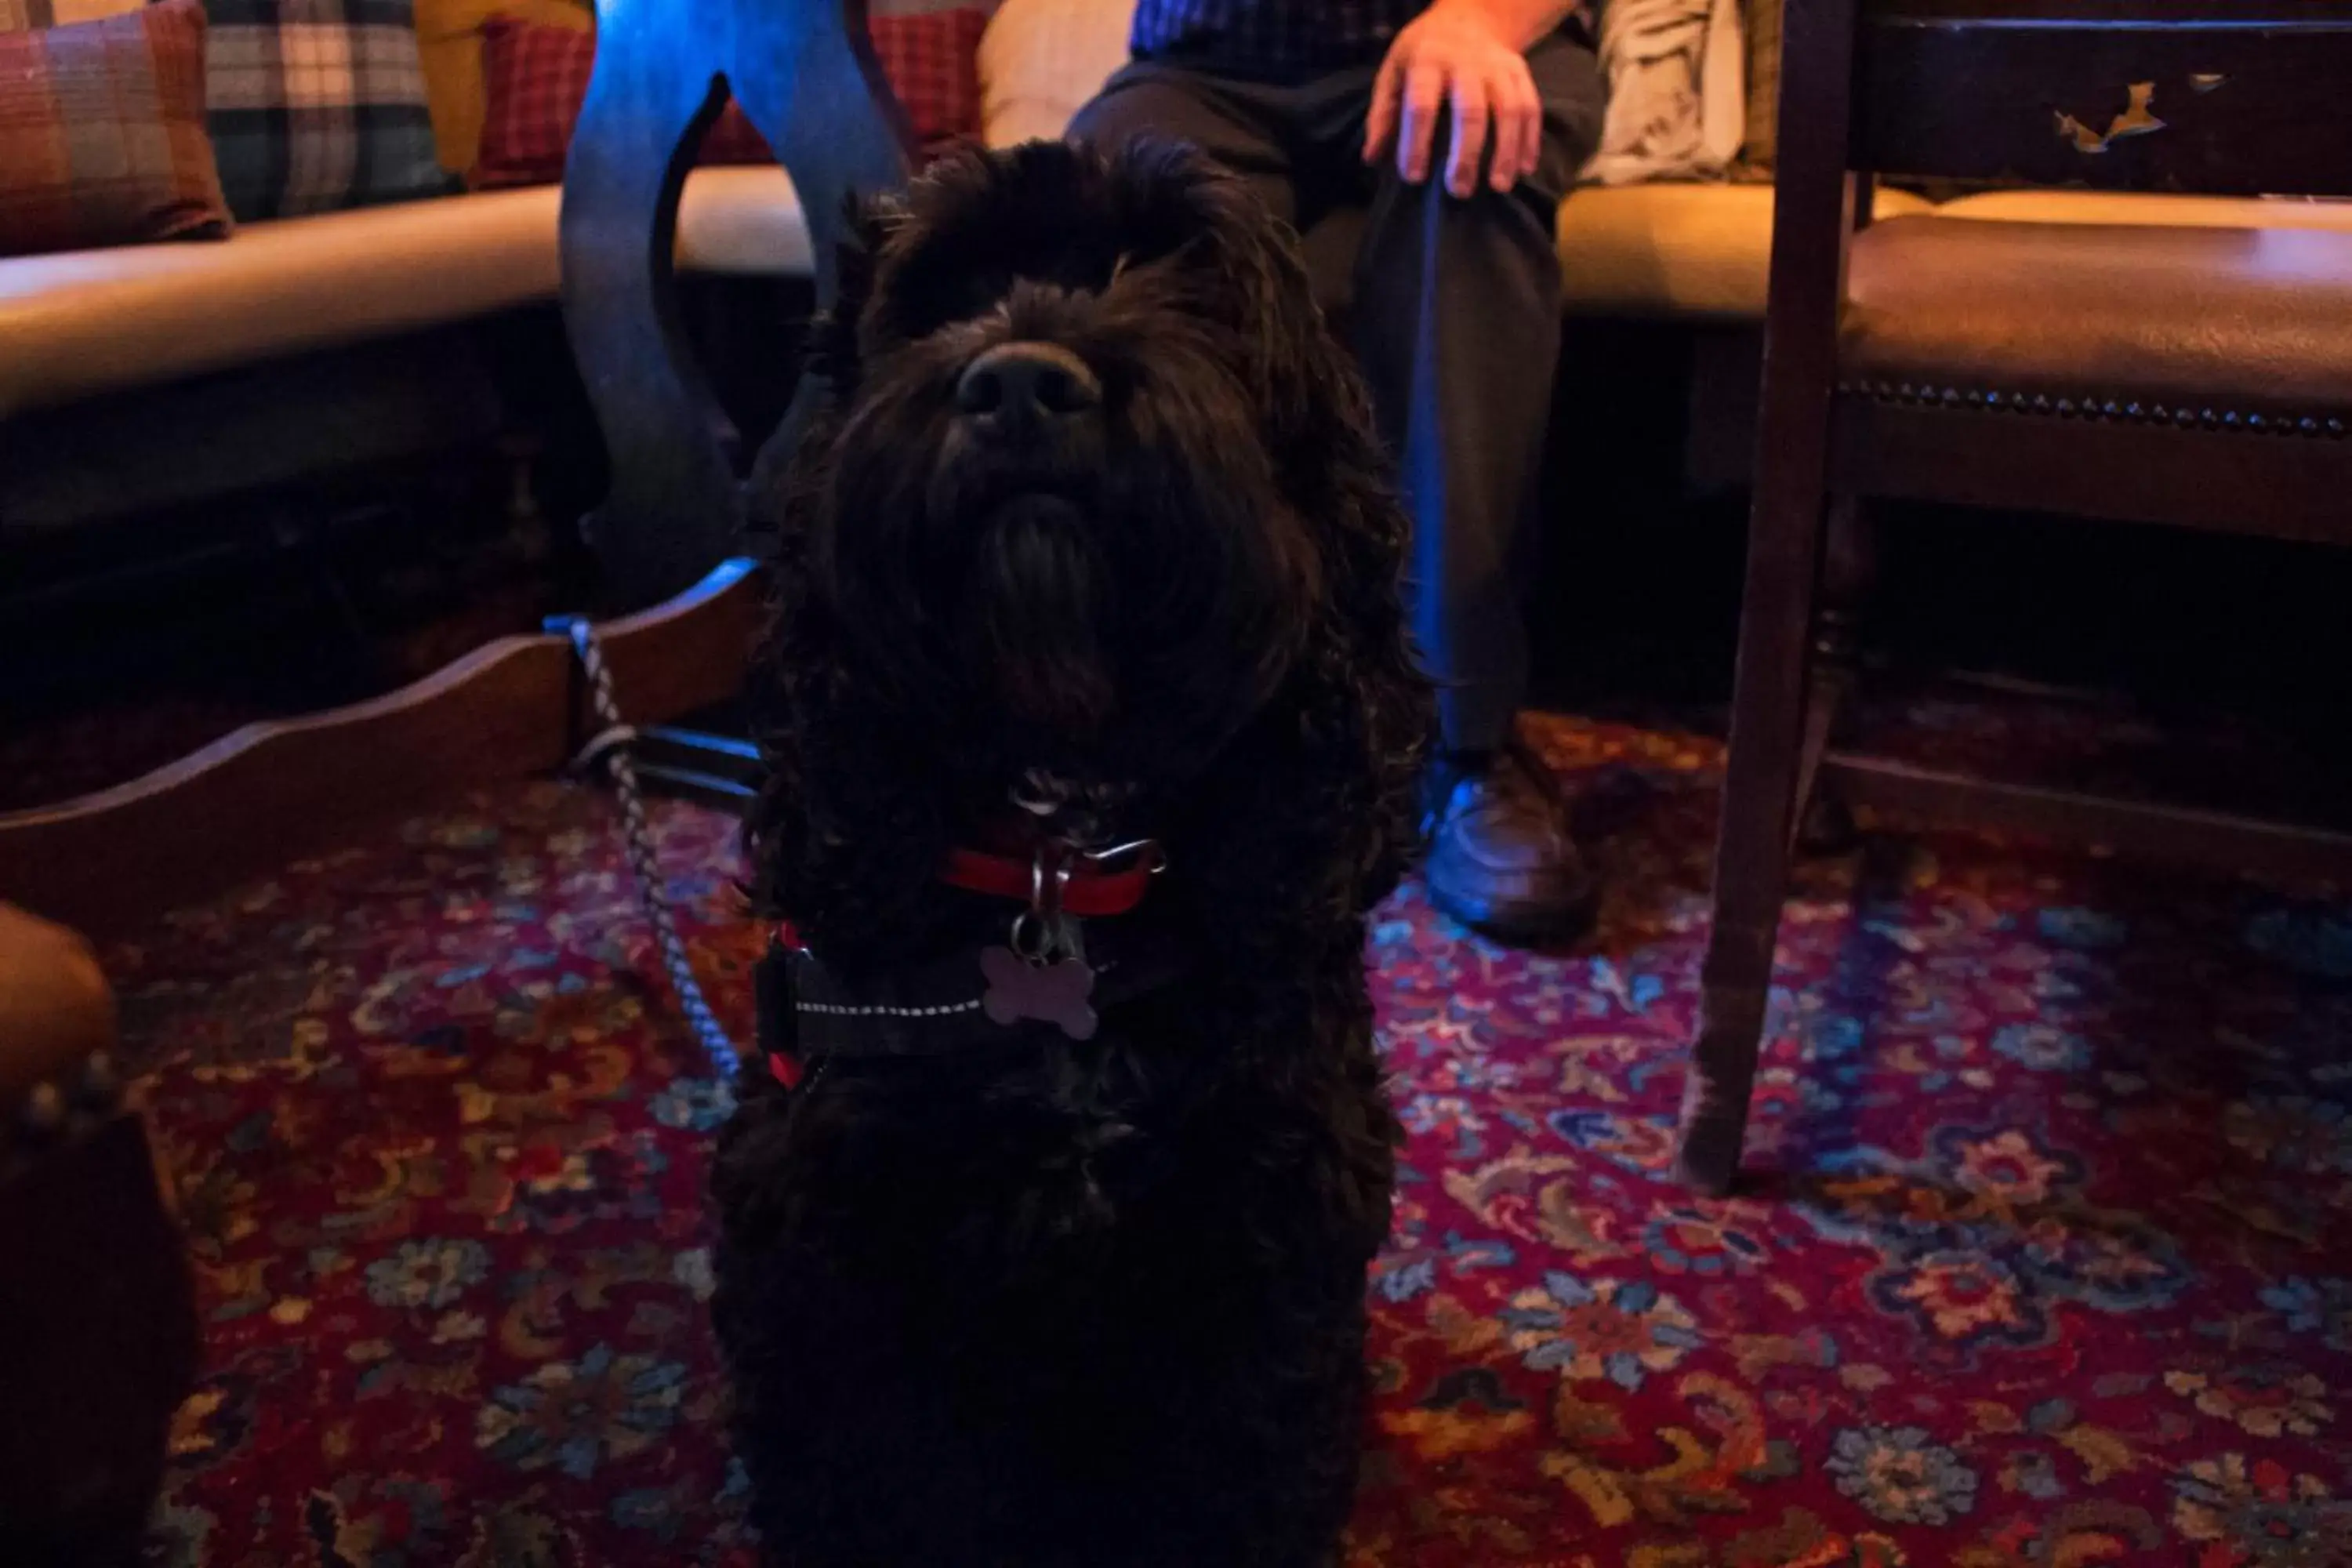 Pets in The Groes Inn